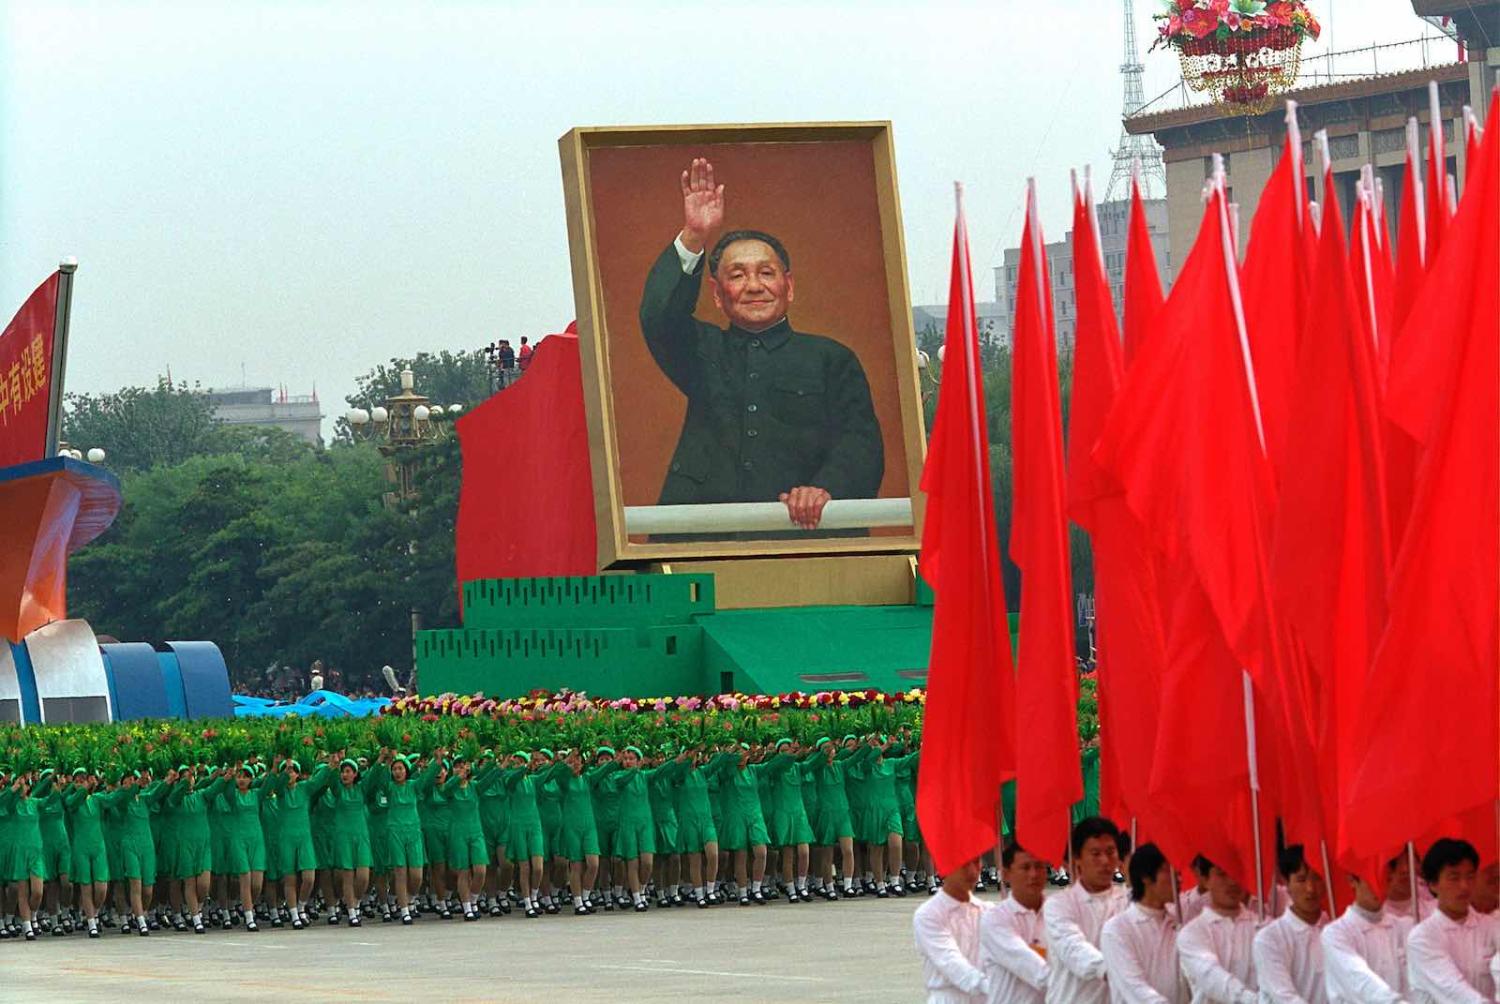 A portrait of Deng Xiaoping is displayed during a parade marking the 50th anniversary of the People' s Republic of China, Tiananmen Square, Beijing, 1 October 1999 (Photo: David Hume Kennerly/Getty Images)